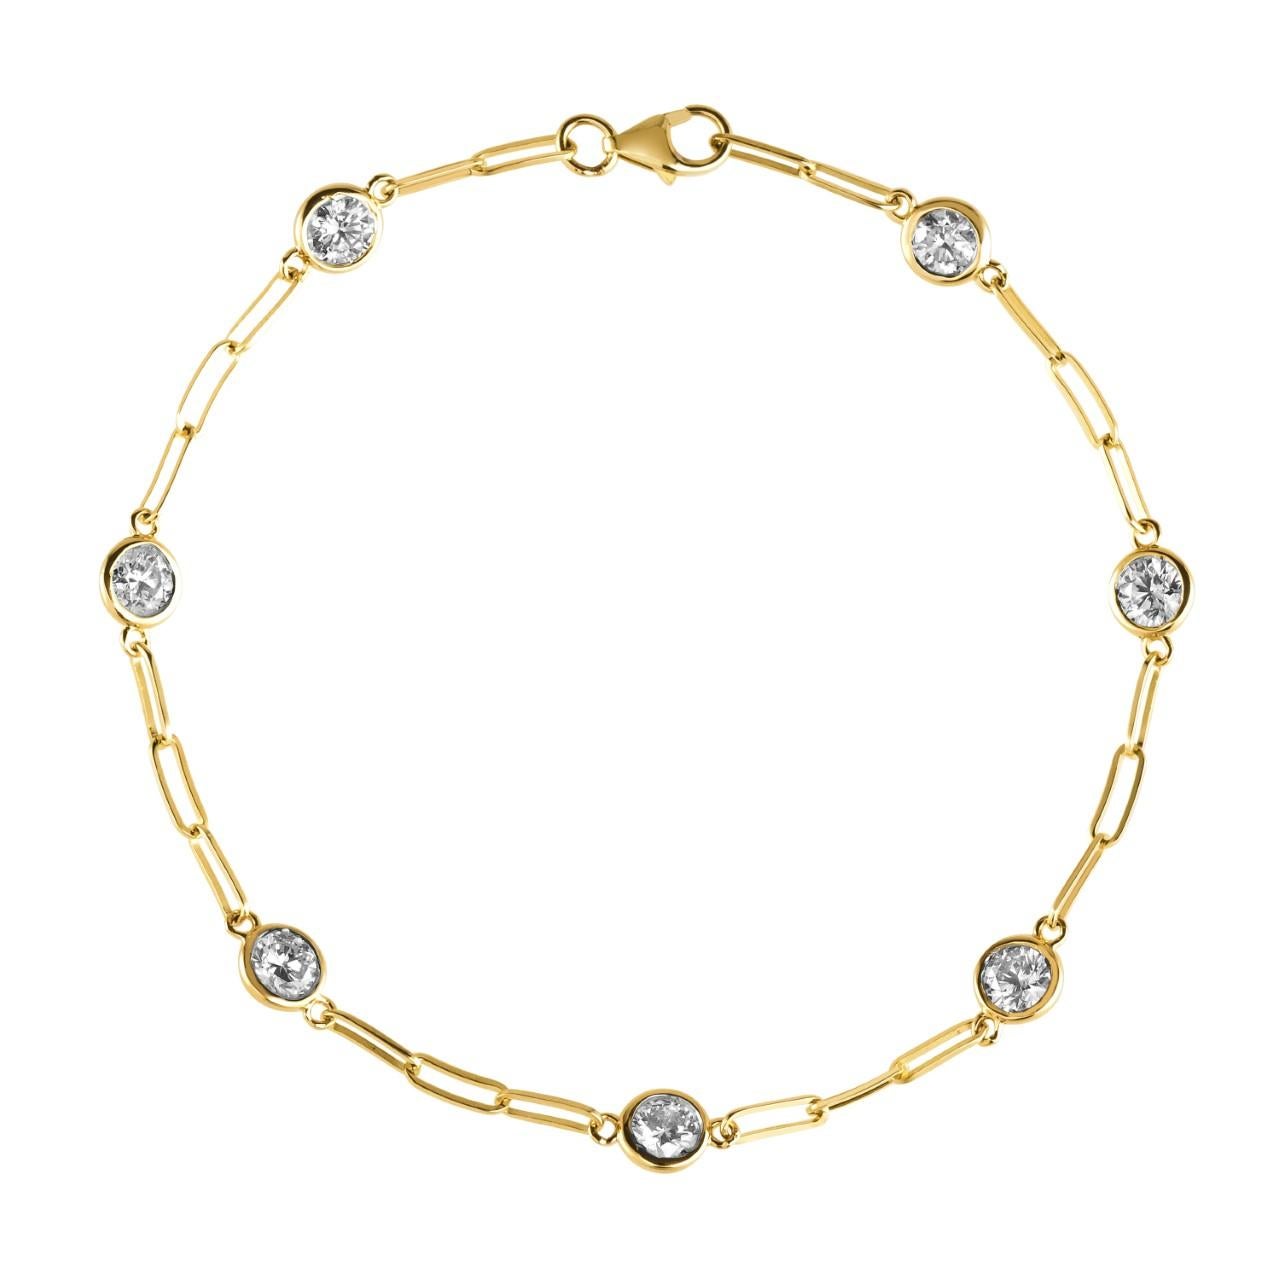 1.50 Carat Natural Diamond Paper Clip Bracelet G SI 14K Yellow Gold 7 inches

100% Natural Diamonds, Not Enhanced in any way
1.50CT
G-H 
SI  
14K Yellow Gold, Bezel set, 1.9 grams
7 inches in length, 3/16 inch in width
7 diamonds, each diamond is